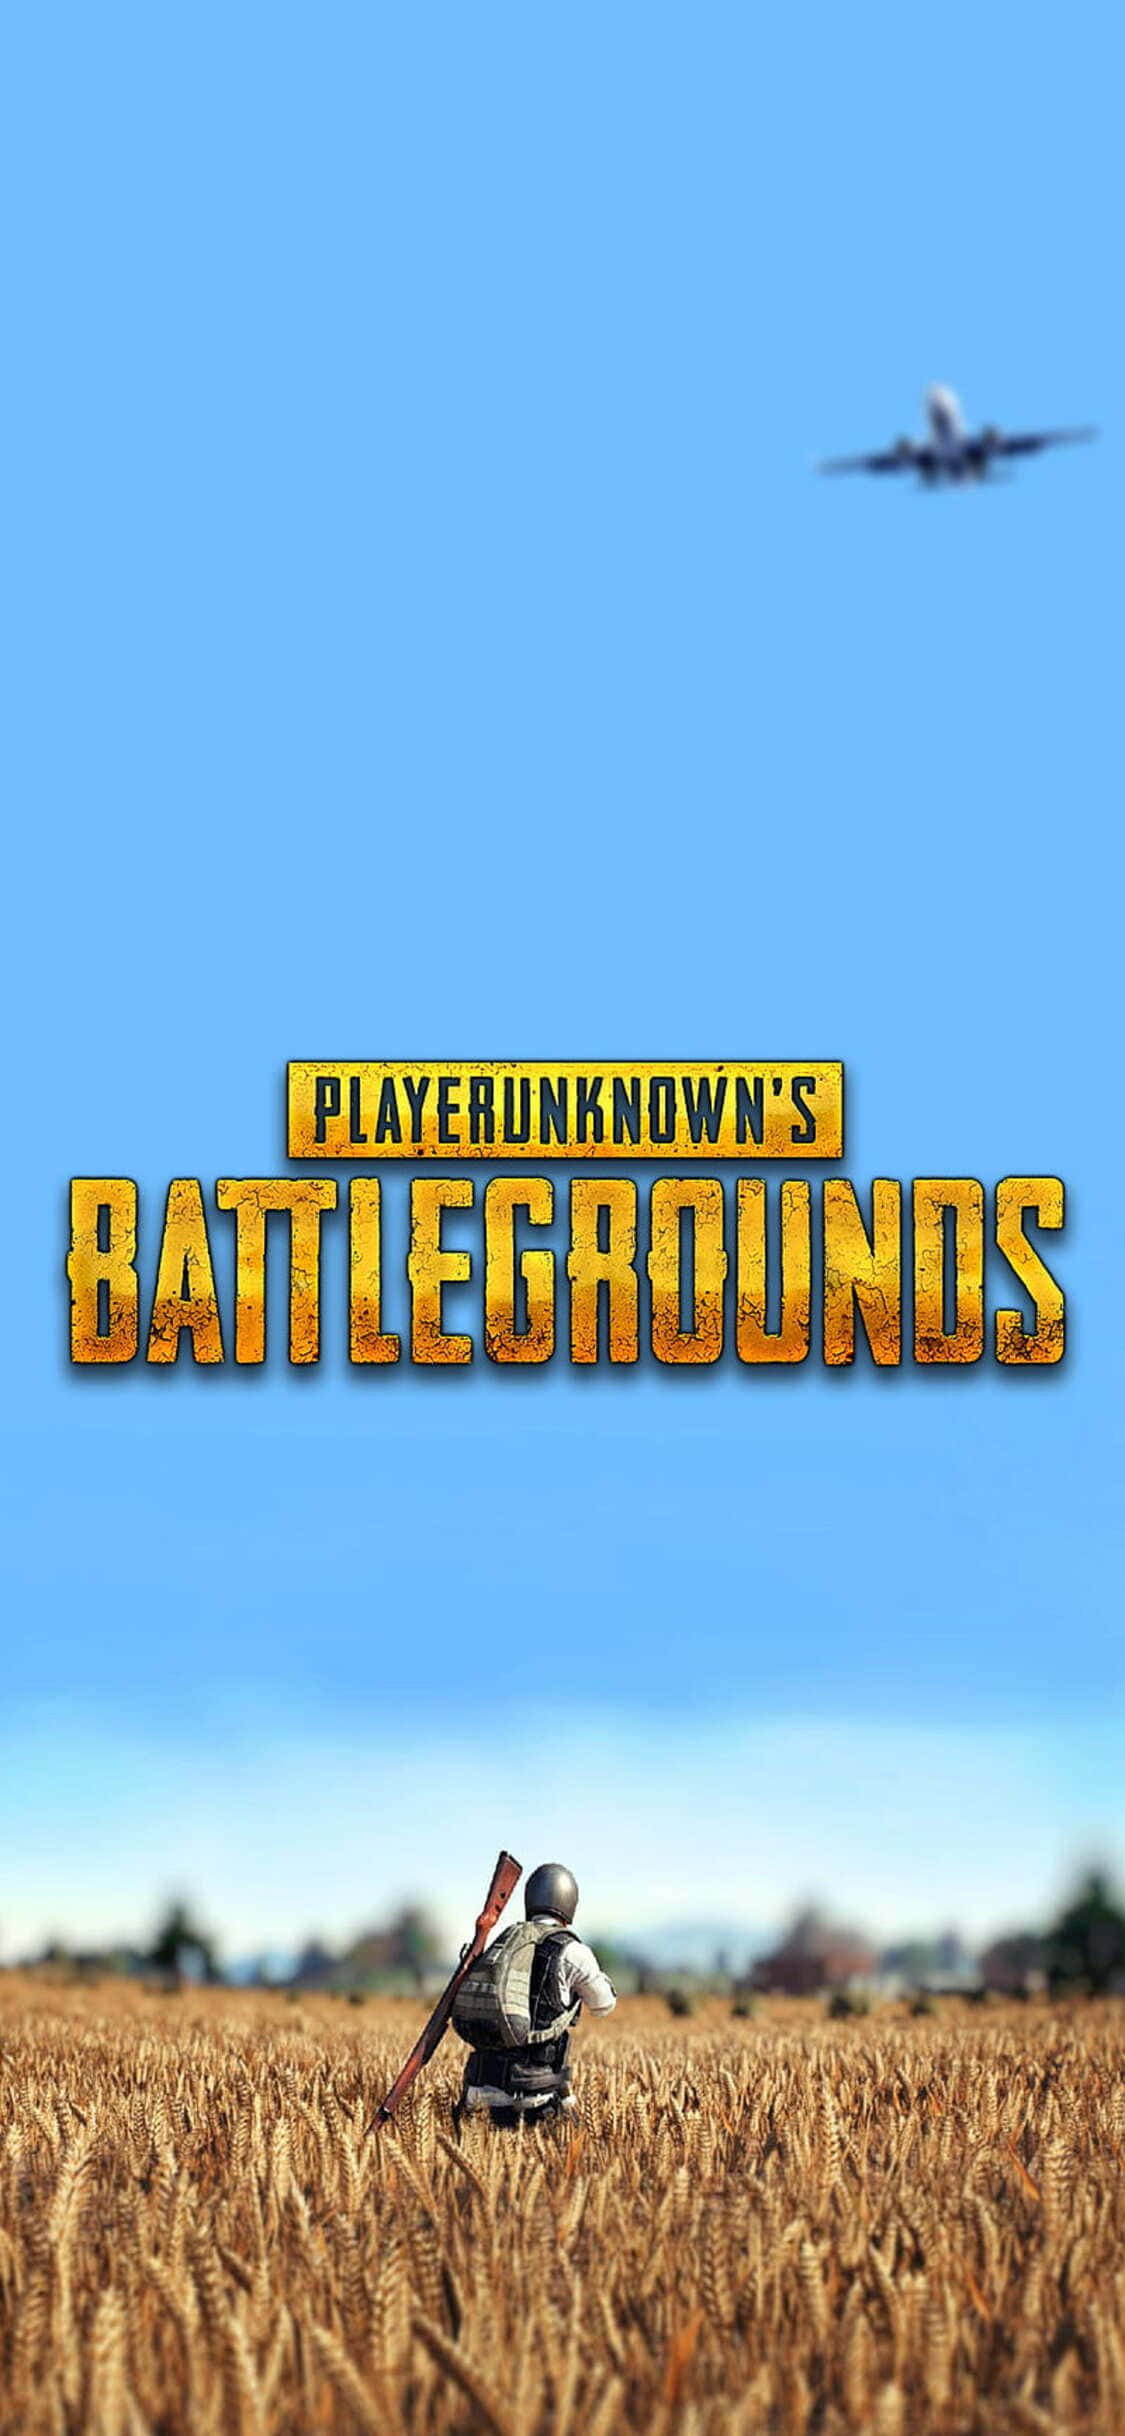 "enlist In The Battle Royale With Iphone X Playerunknown's Battlegrounds"